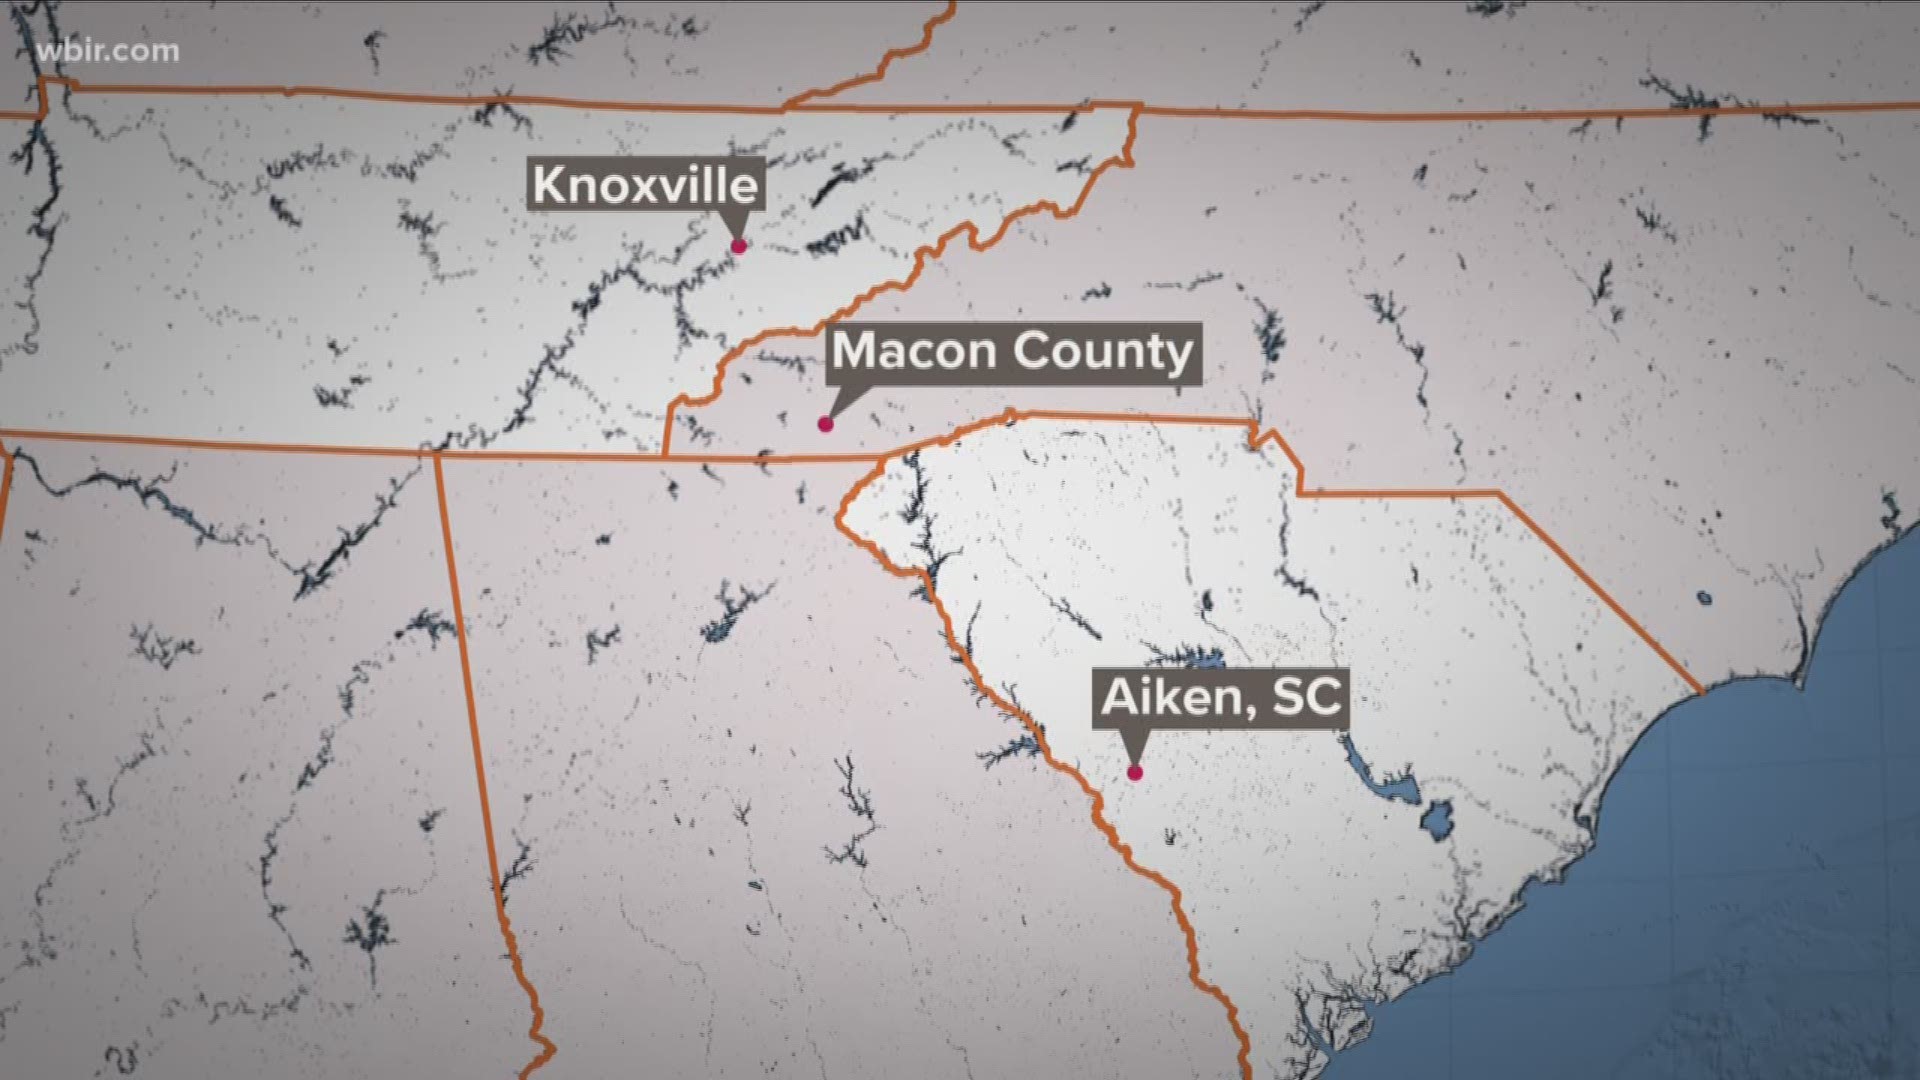 Air traffic controllers said they lost contact with the flight at about 6:20 p.m. Thursday when it was about 17 miles south of Macon County Airport in Franklin, North Carolina.